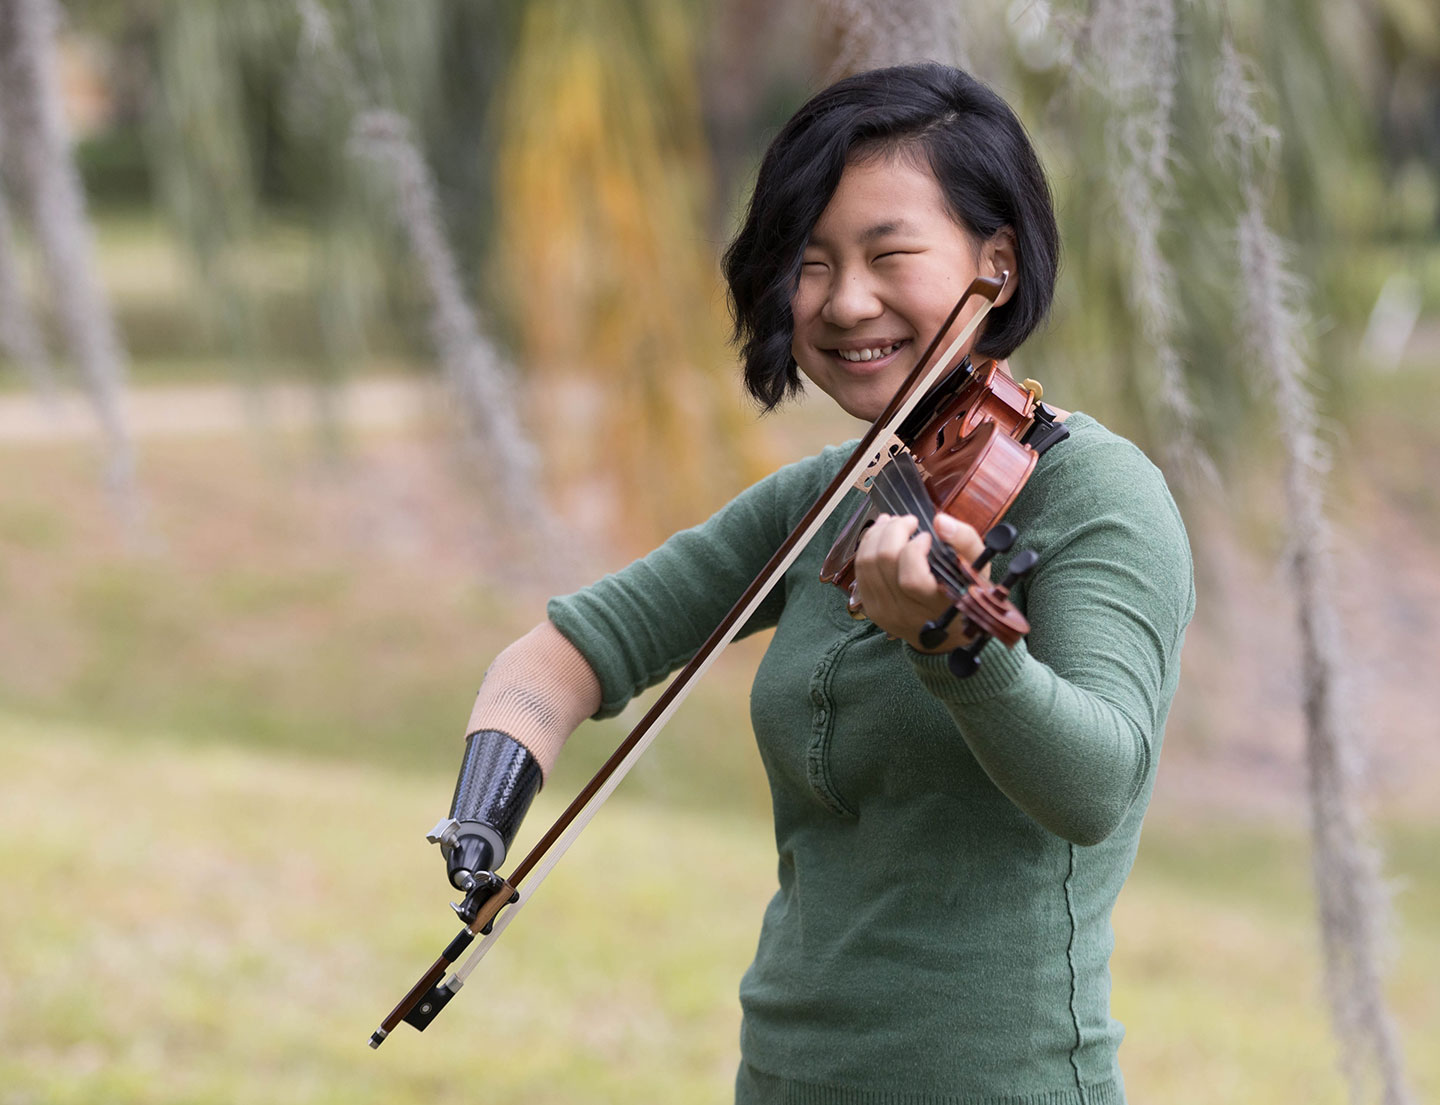 female with prosthetic arm playing violin